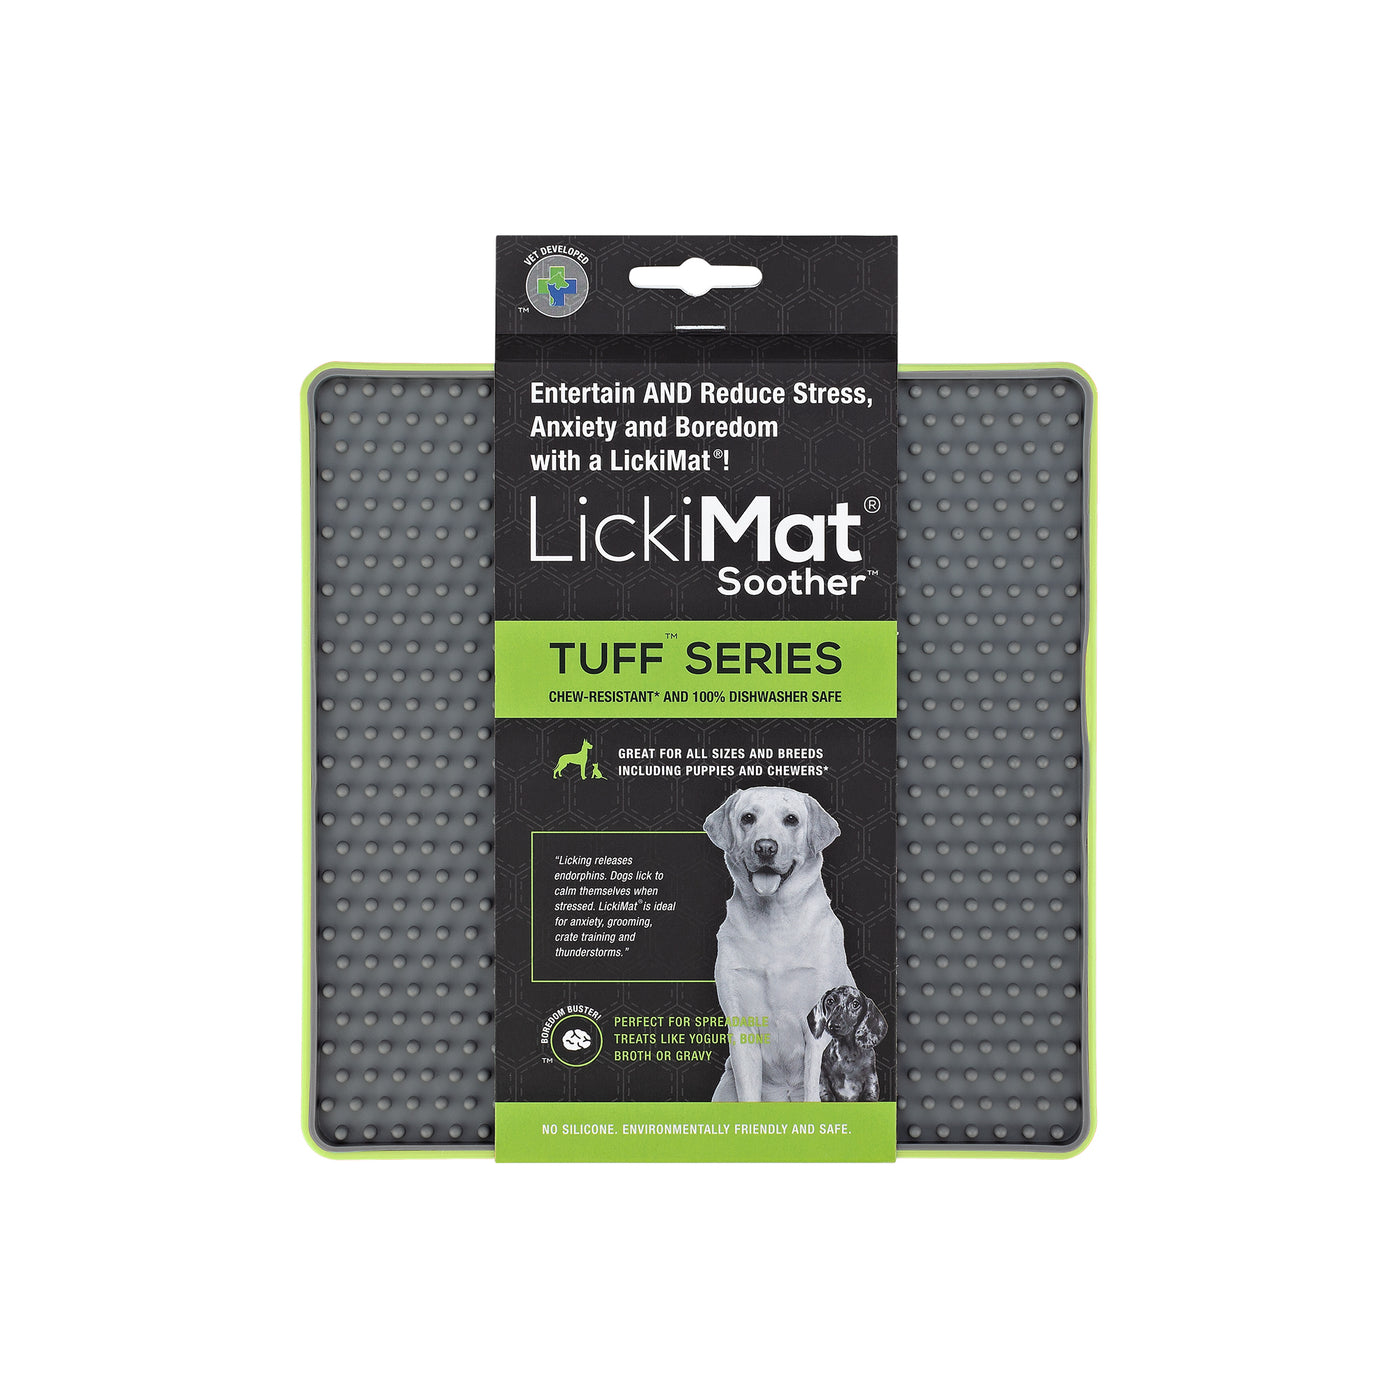 LickiMat - Soother Tuff Series